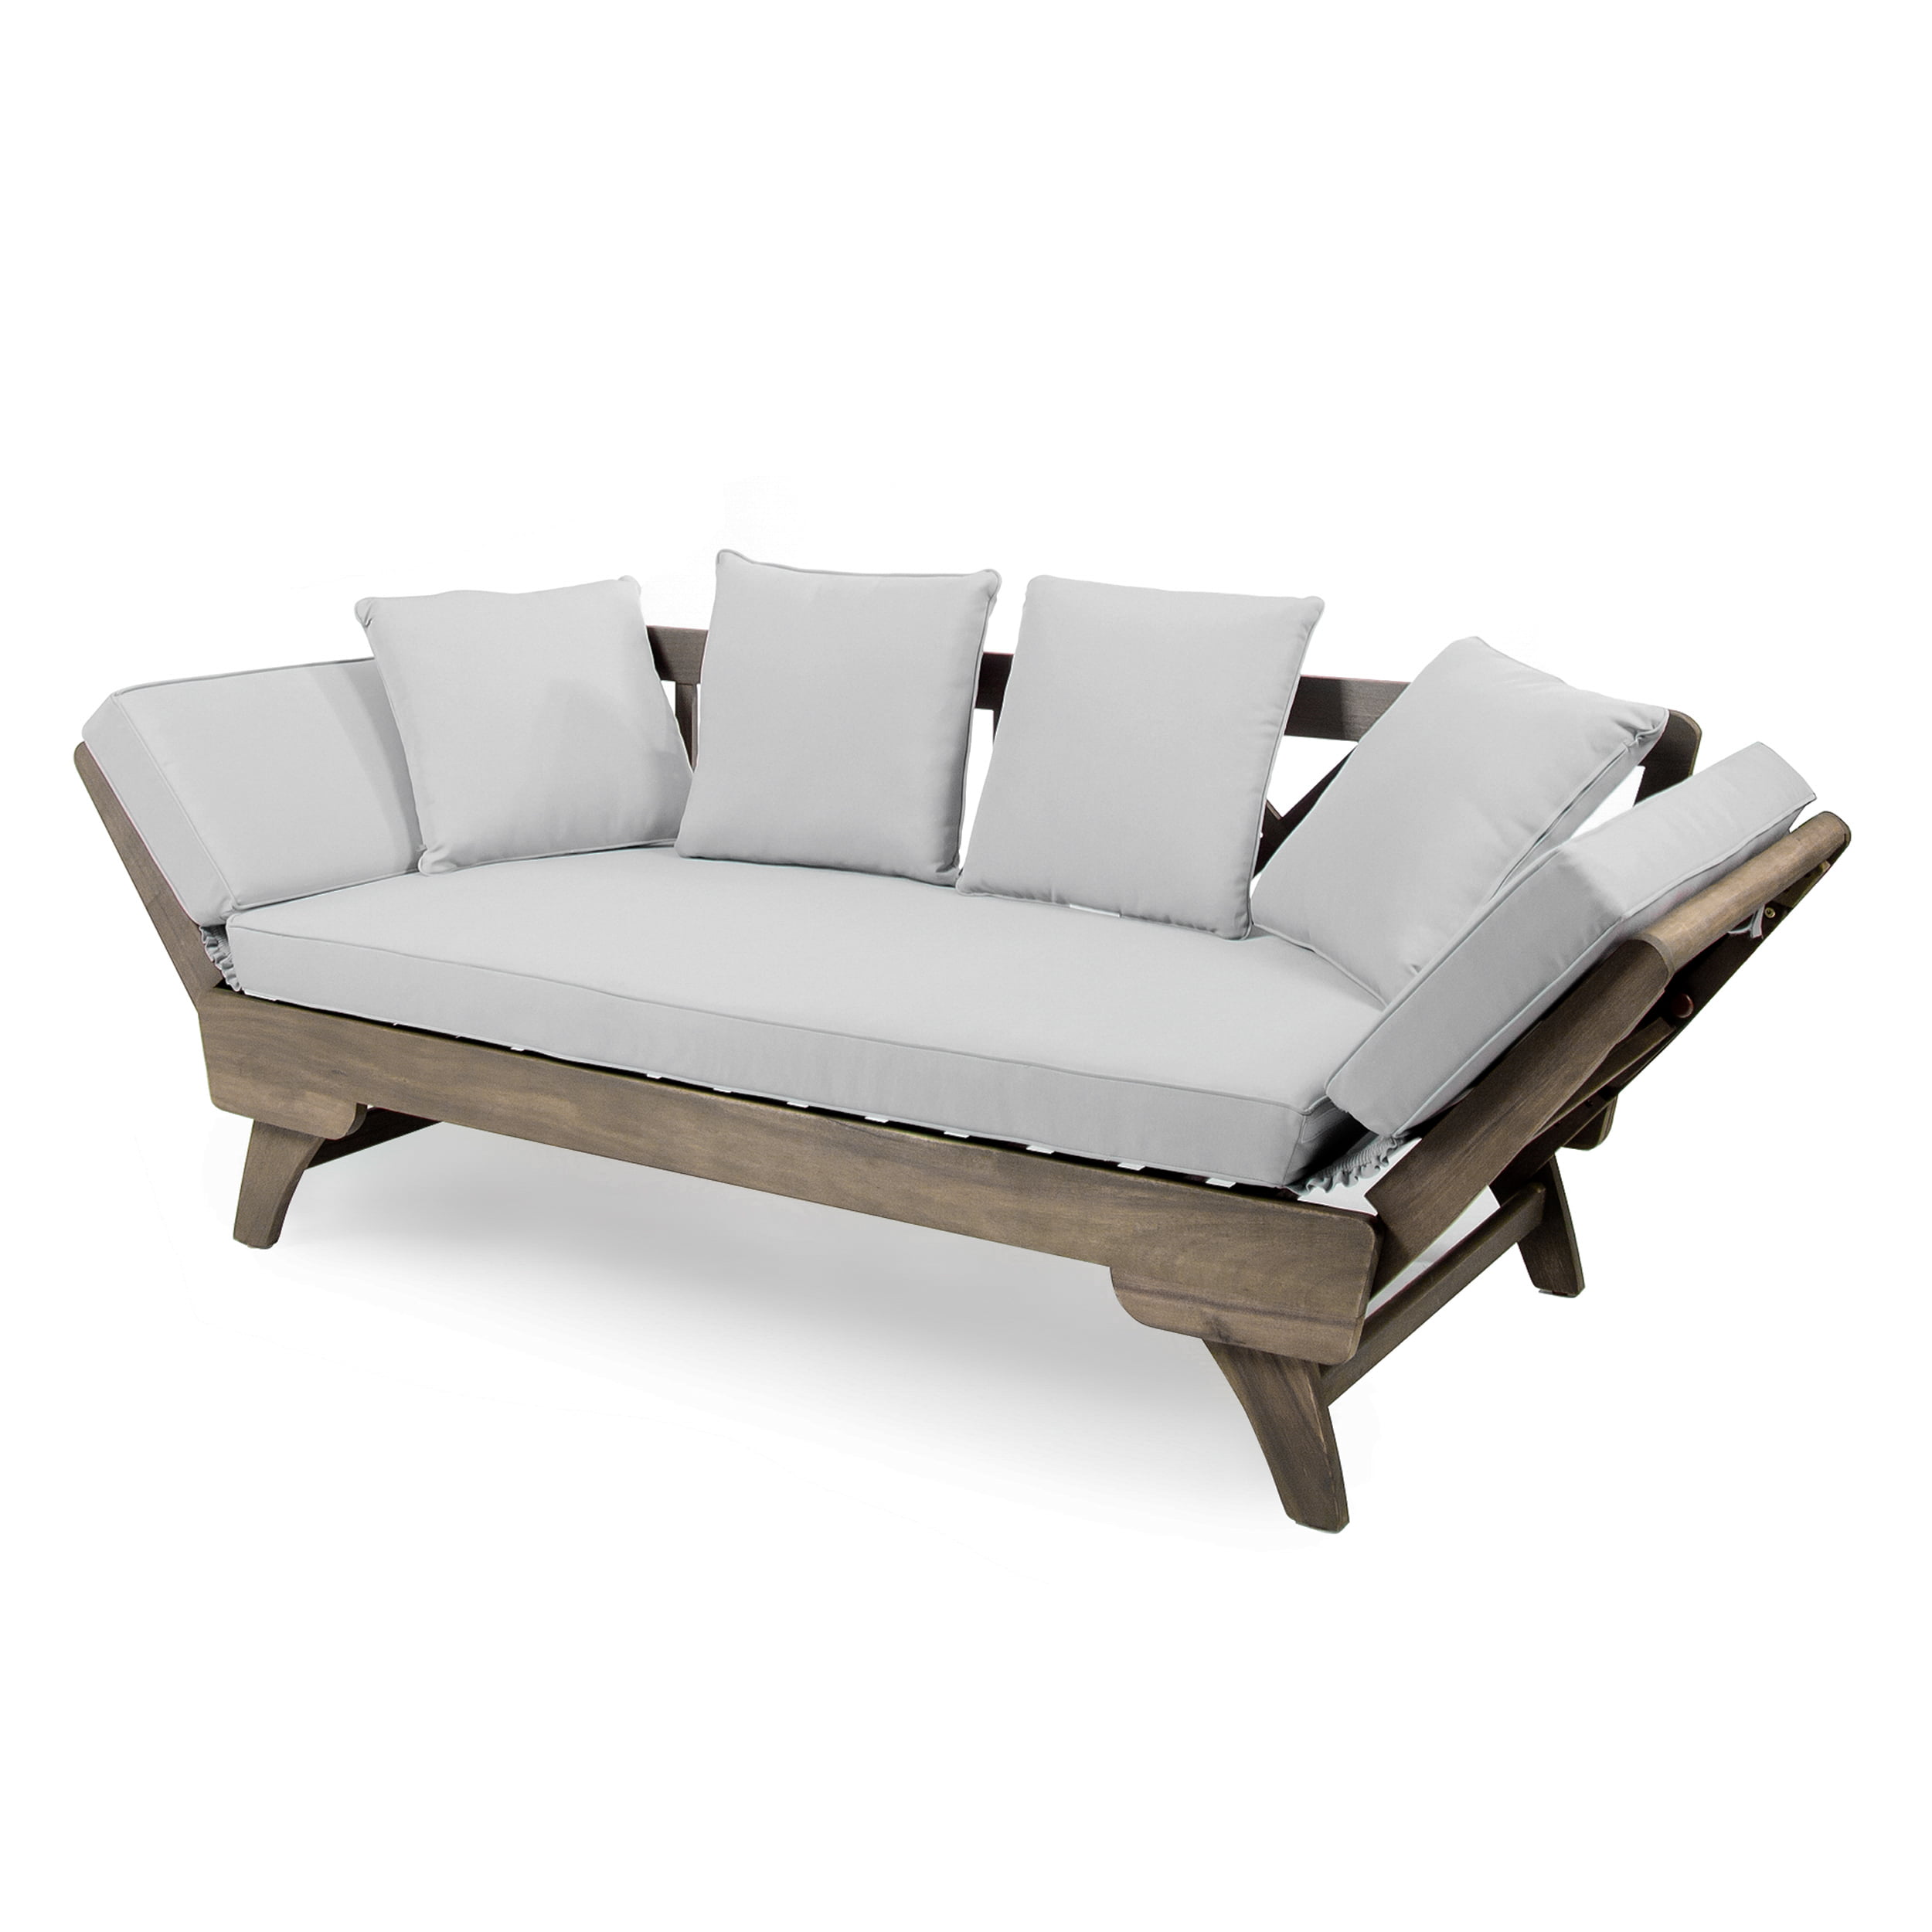 Othello Outdoor Grey Finished Acacia Wood Daybed With Light Grey Water Resistant Cushions Walmart Com Walmart Com